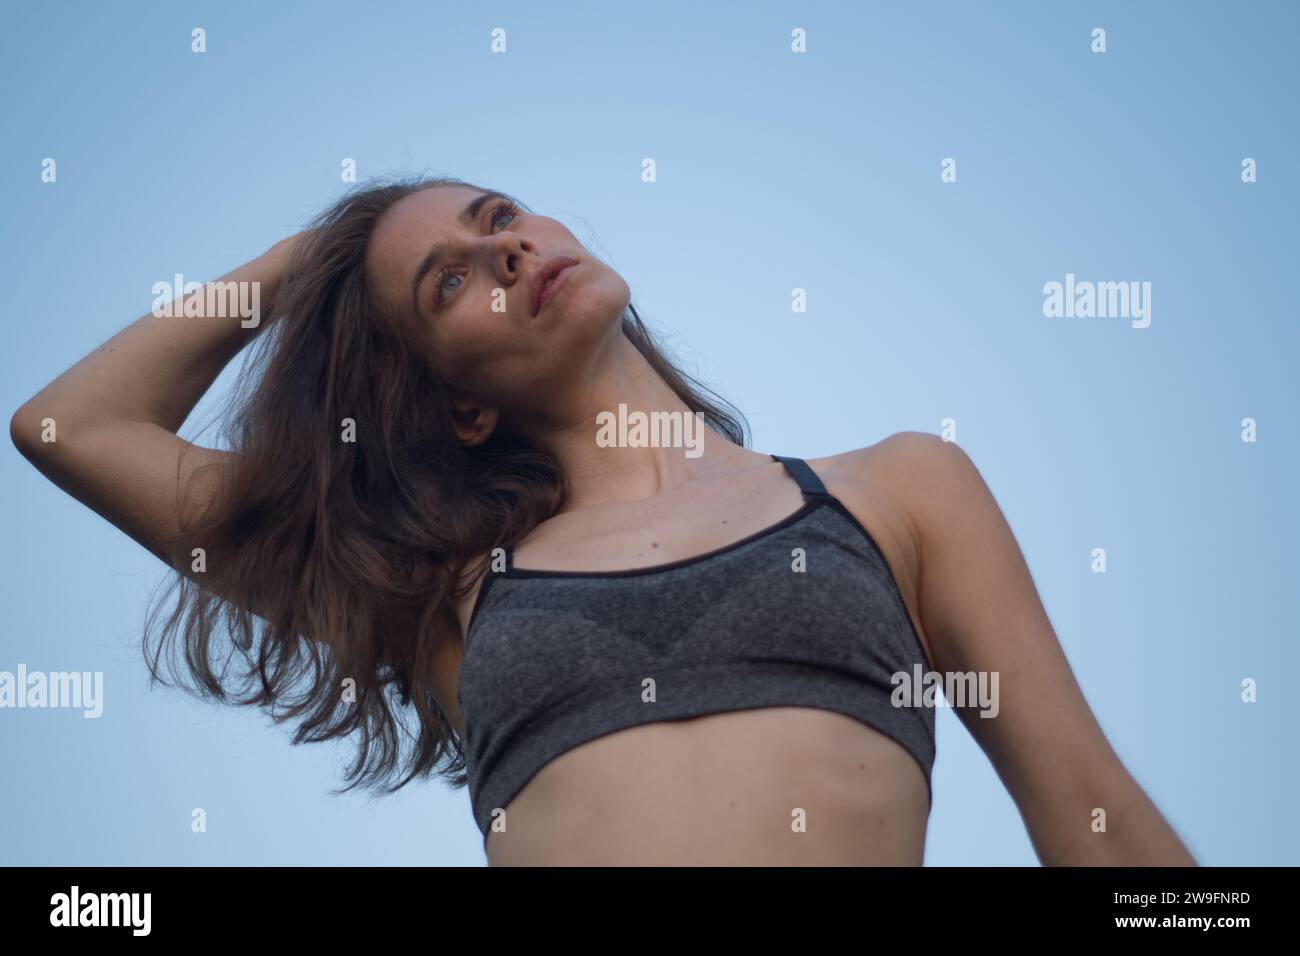 A young White woman stretching in a sports bra Stock Photo